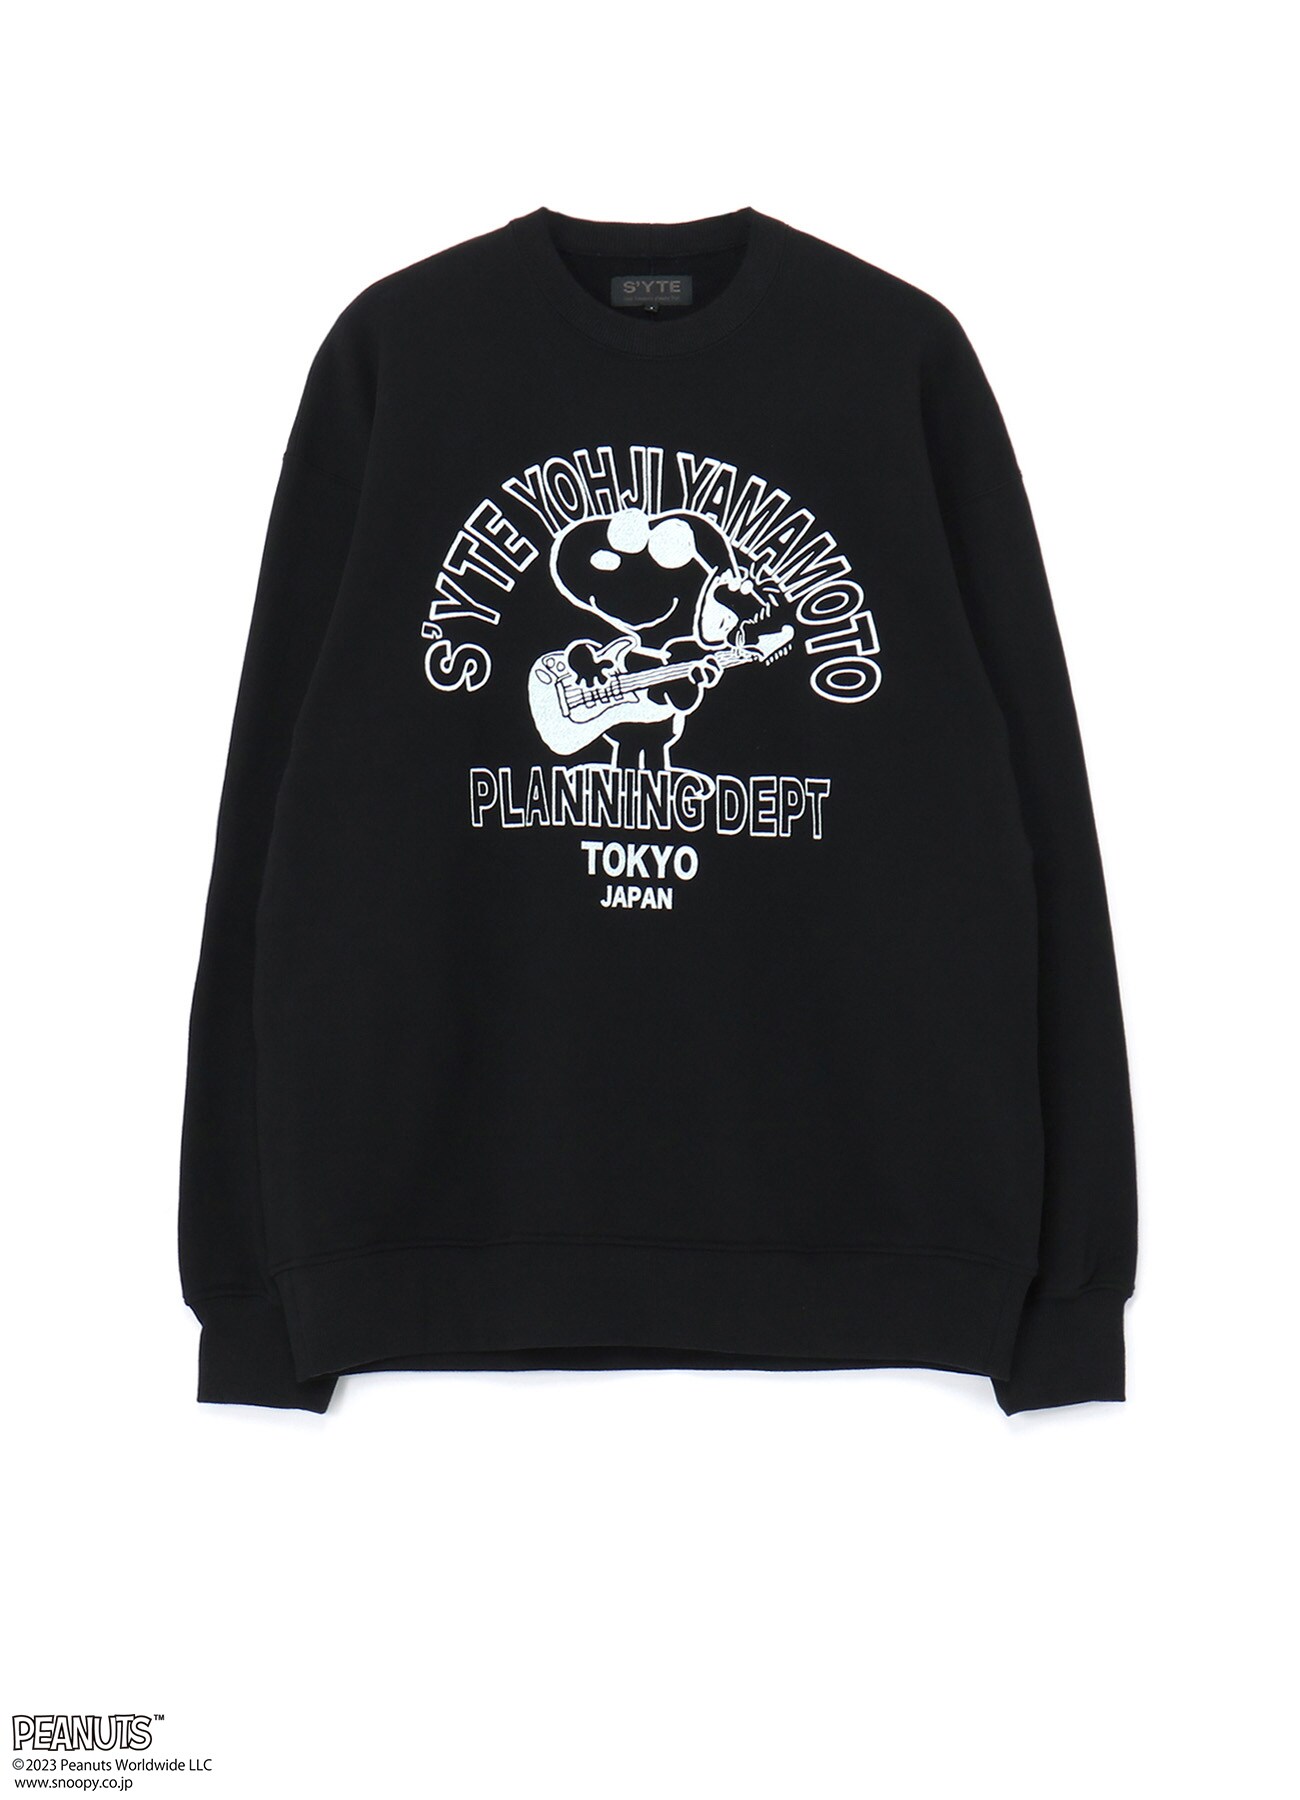 S'YTE x PEANUTS FRENCH TERRY JOE COOL & WOODSTOCK FESTIVAL  SWEATSHIRT  WITH PRINTED ILLUSTRATIONS